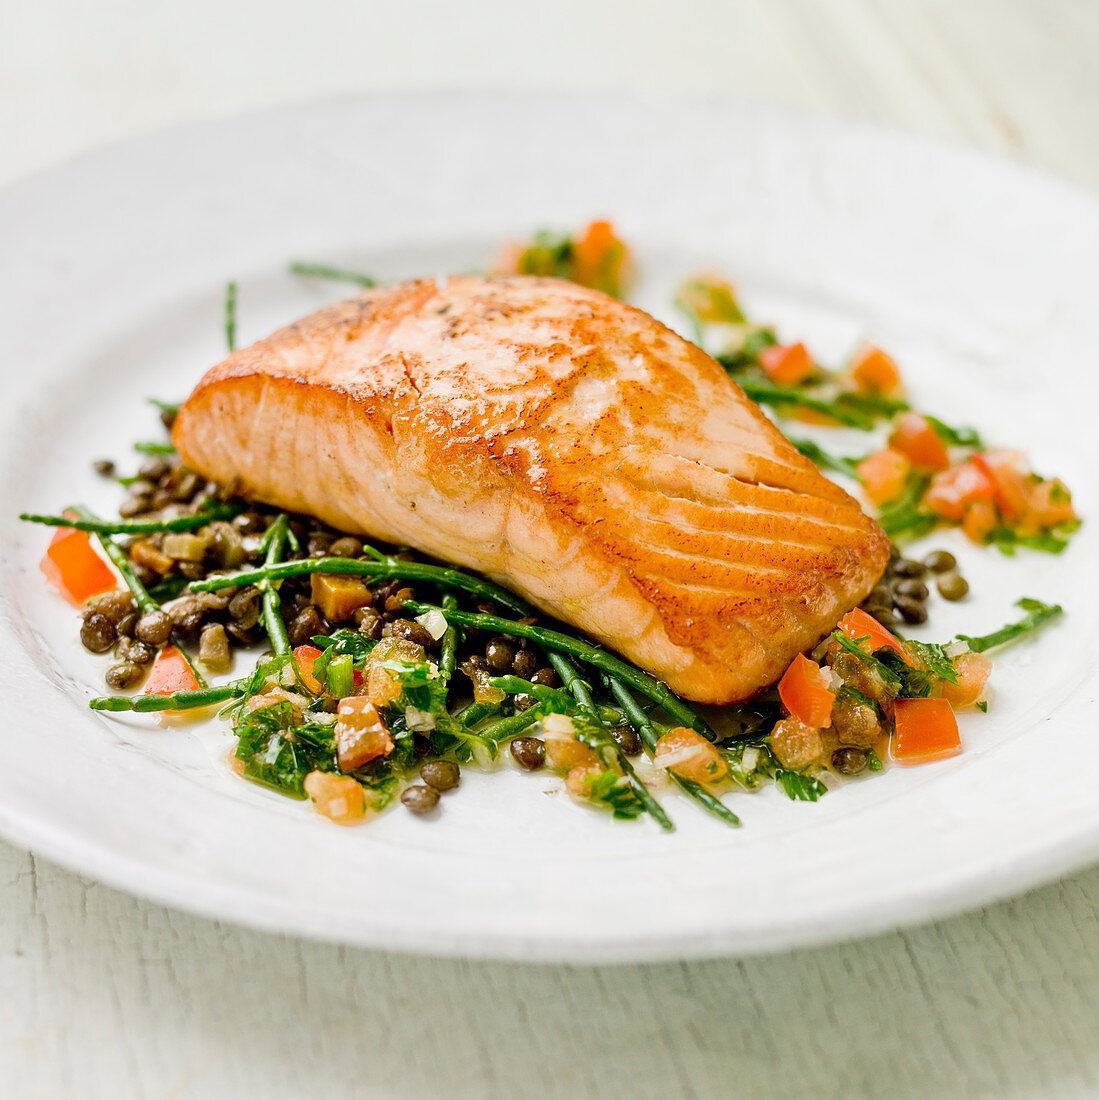 Salmon fillet on a bed of samphire, green lentles and tomatoes with a green herb vinegarette